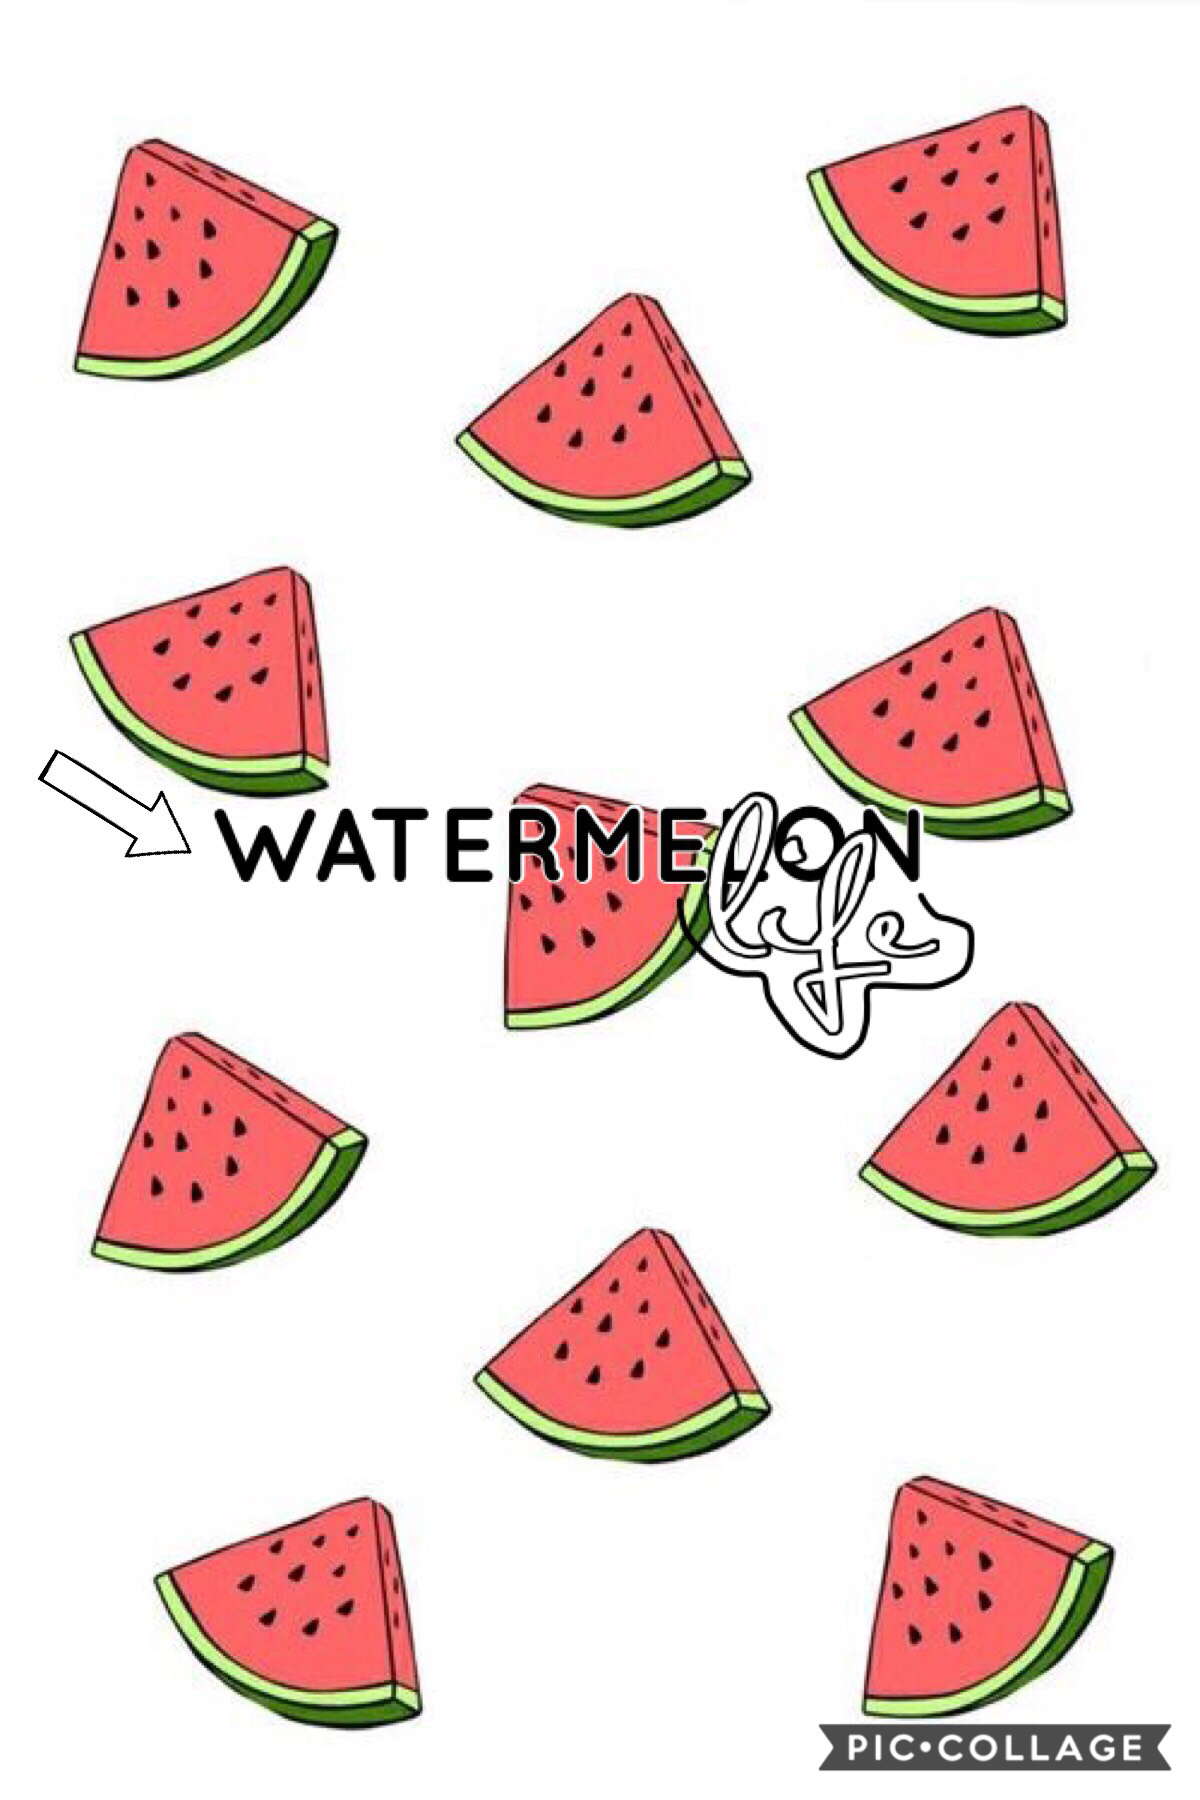 TAPPP PLEASE

Soooo I saw this AMAZING post by “ R333 “ that said “ watermelon life ”and I loved it so I remade it!! 
CREDIT: R333